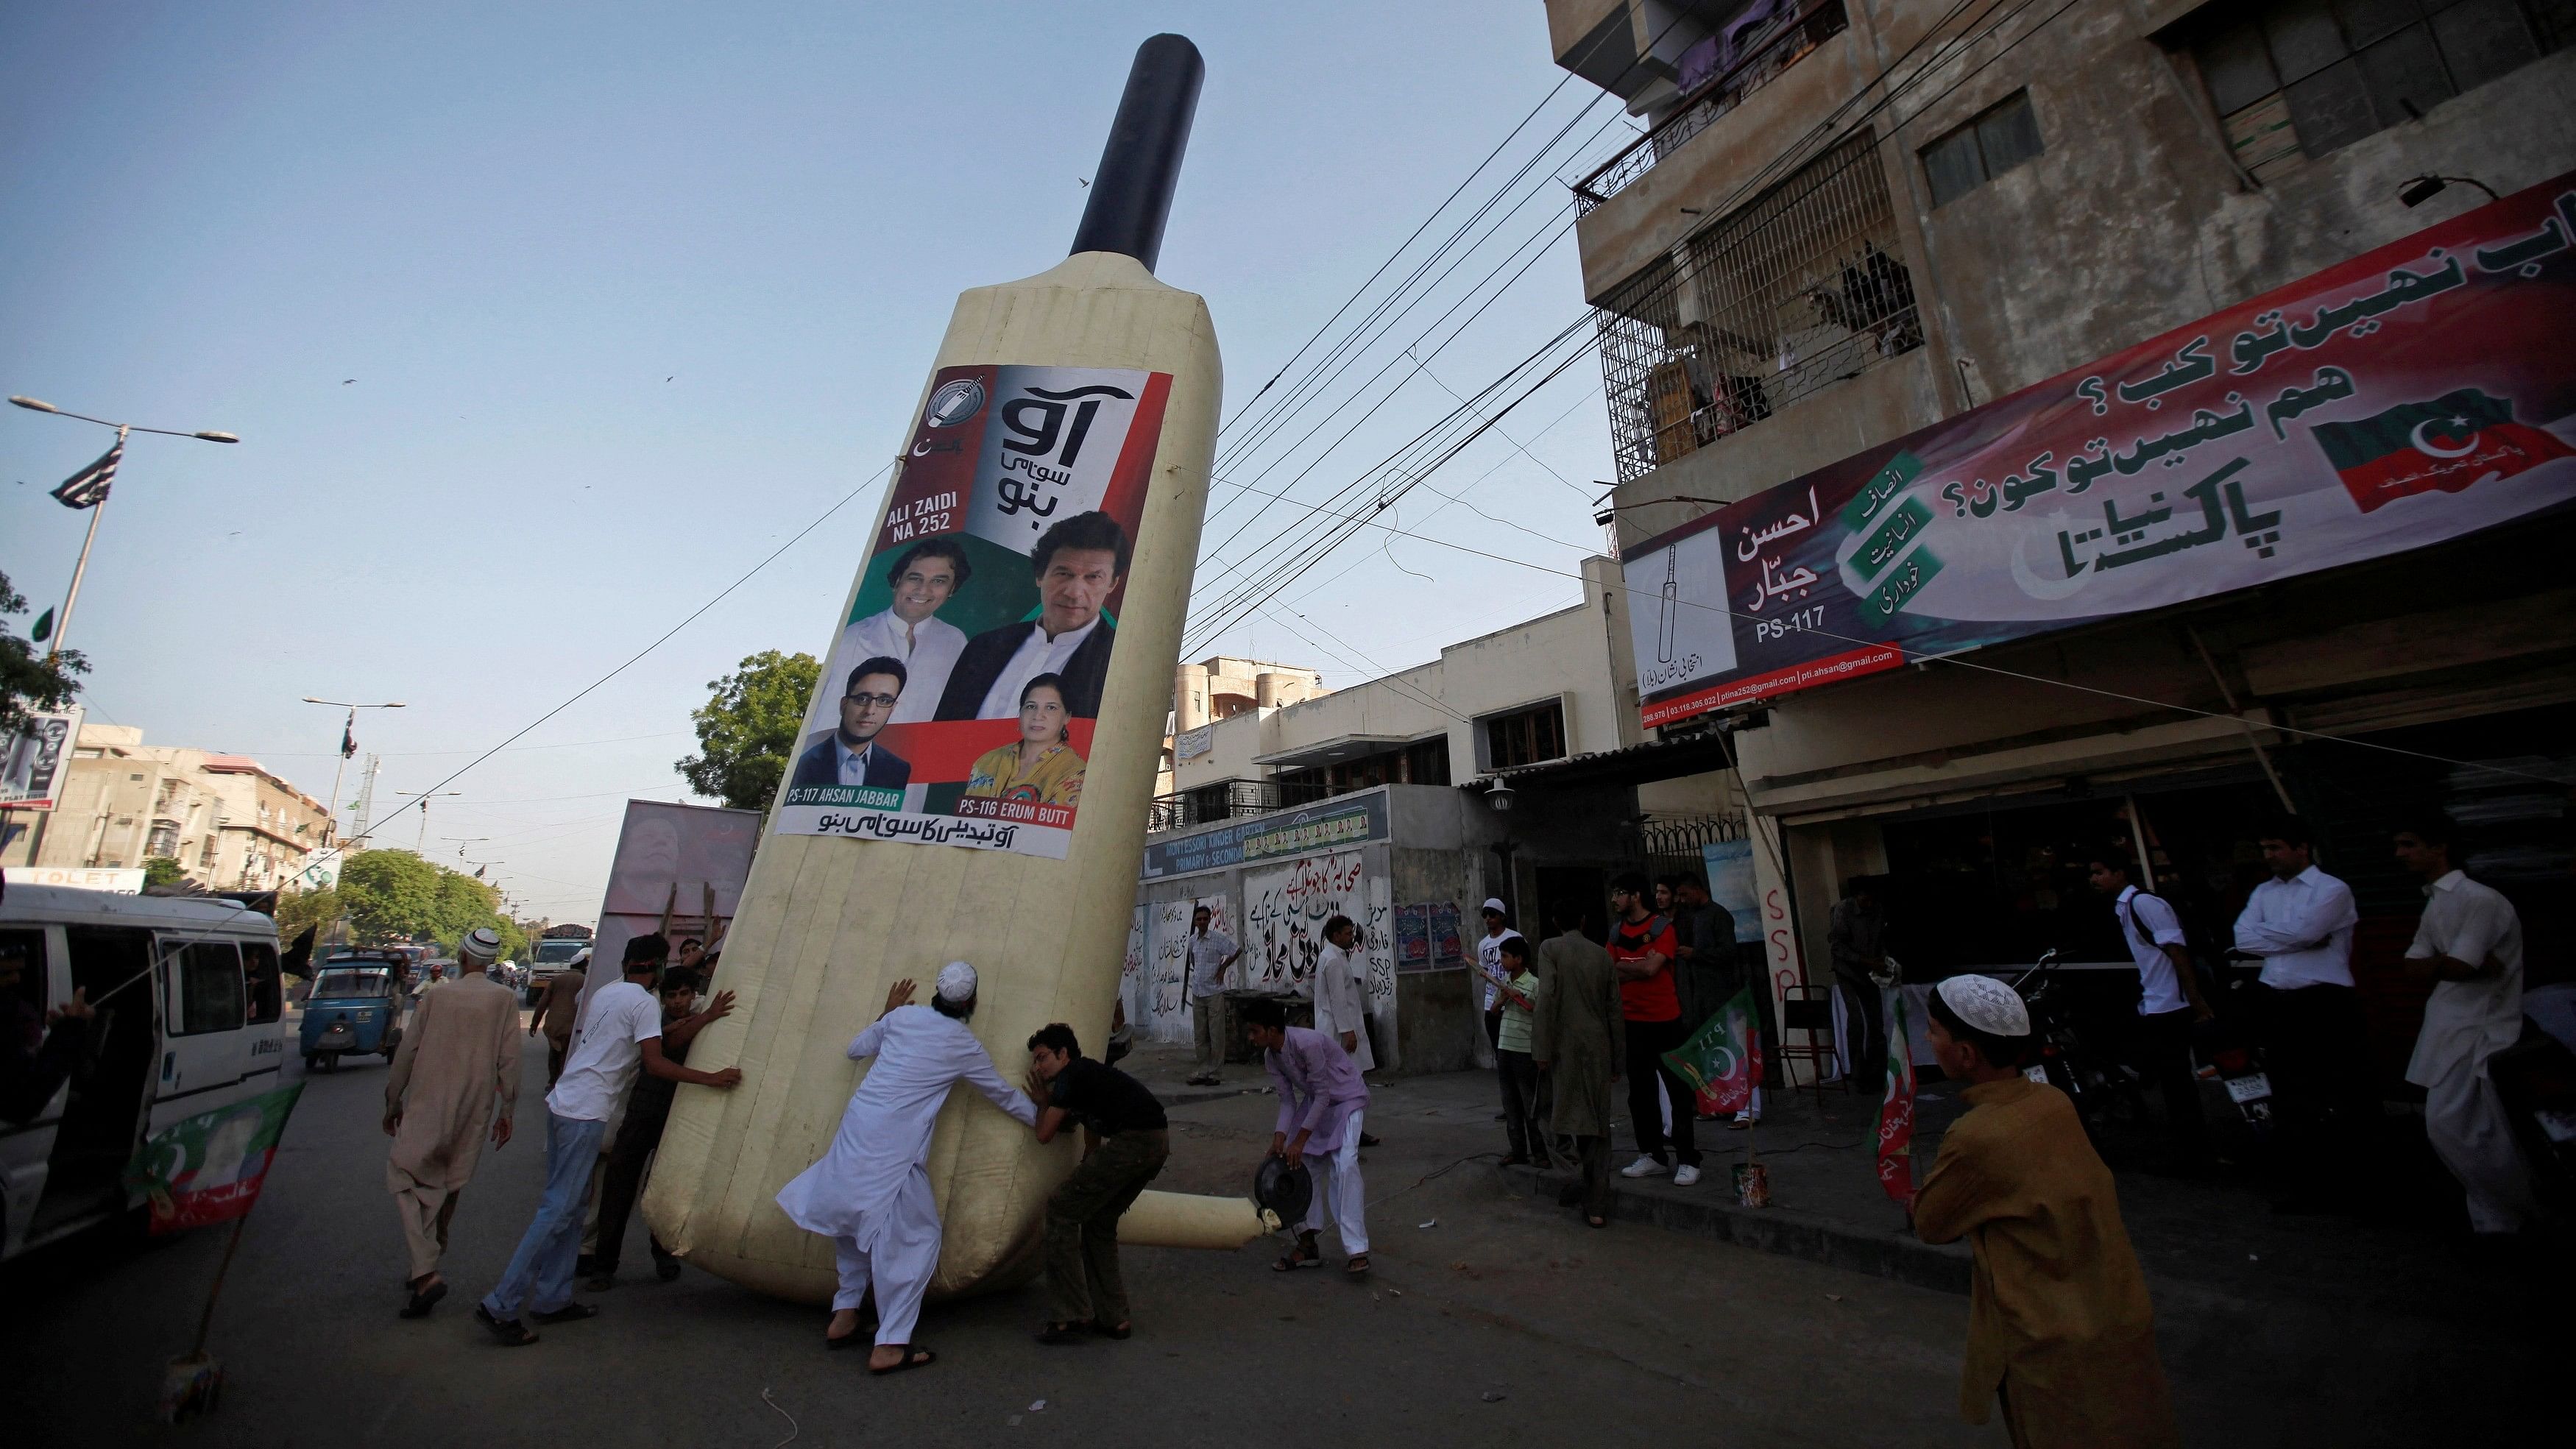 <div class="paragraphs"><p>File Photo: Supporters of Imran Khan, Pakistani cricketer-turned-politician and chairman of political party Pakistan Tehreek-e-Insaf, install a giant bat symbol along a roadside in Karachi May 4, 2013. </p></div>